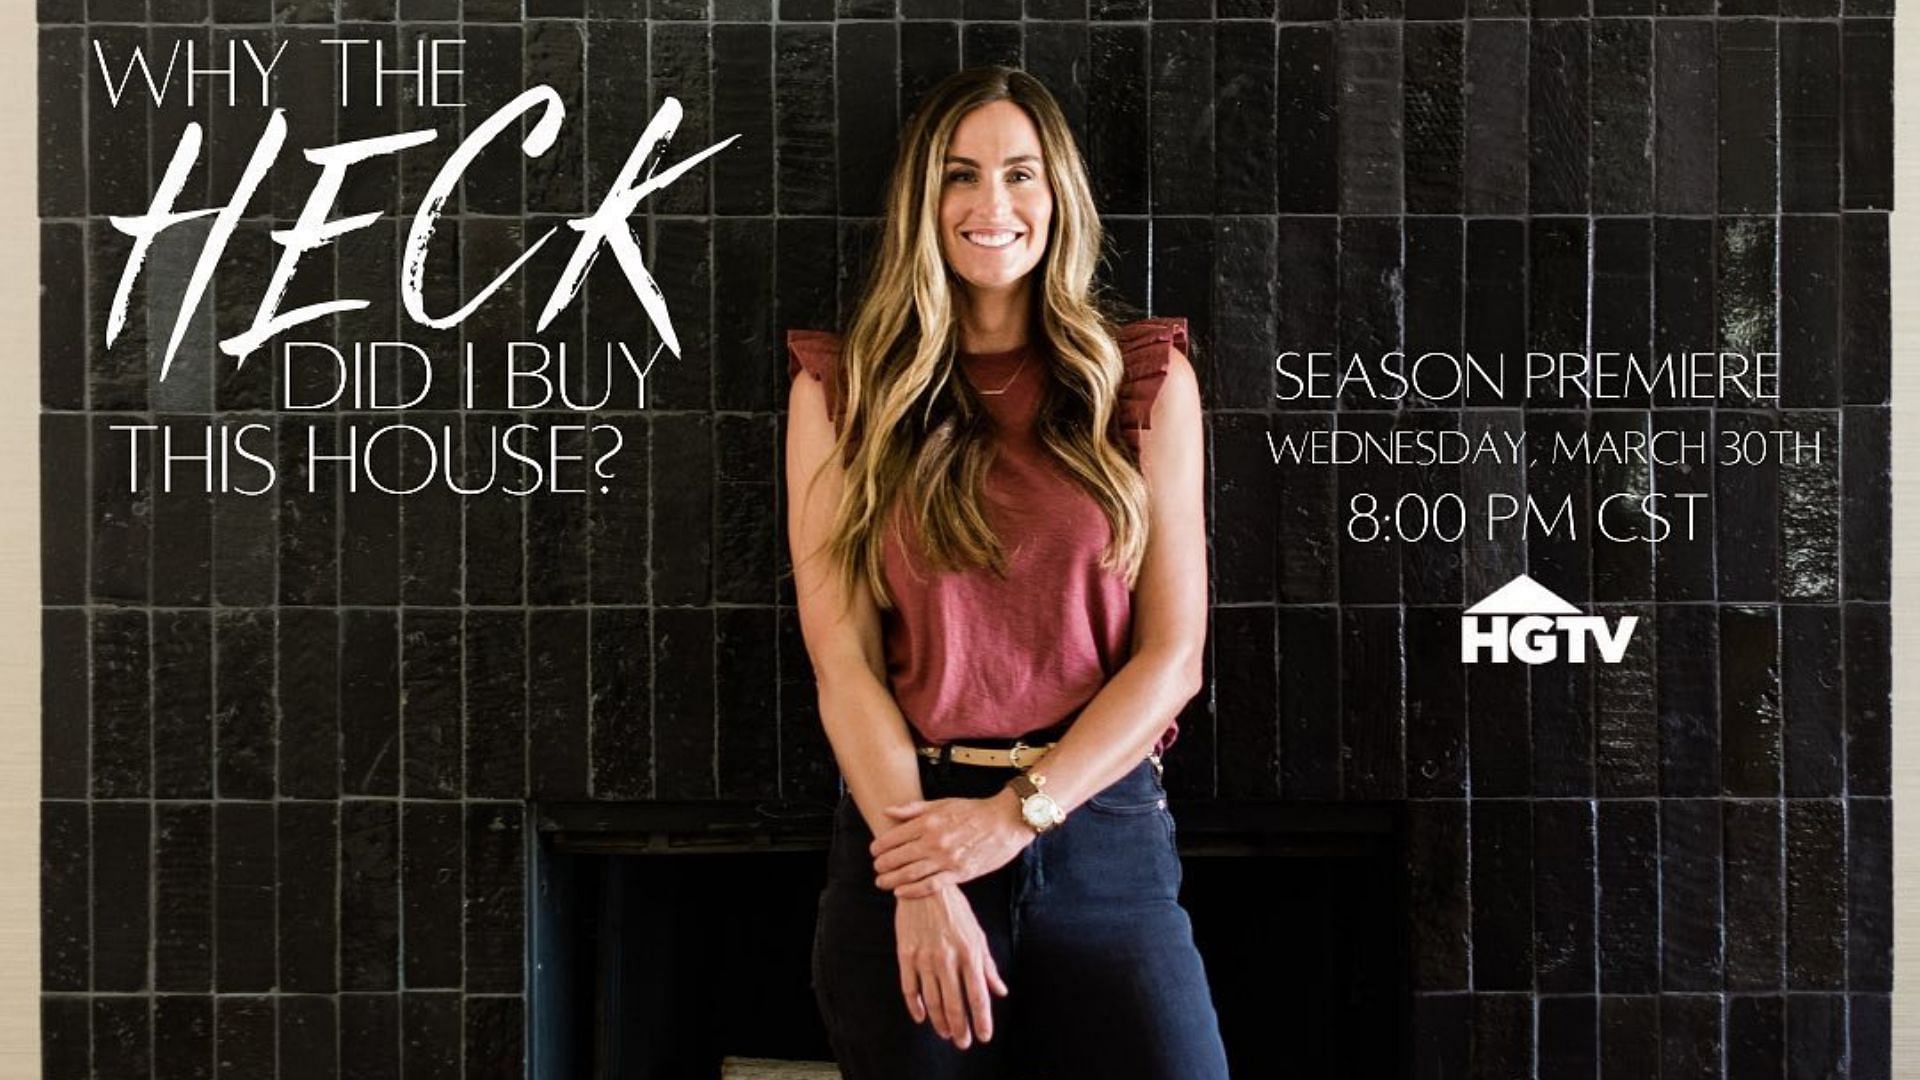 Promotional image for Why the Heck Did I Buy This House? (Image via Instagram/kimspradlinwolfe)